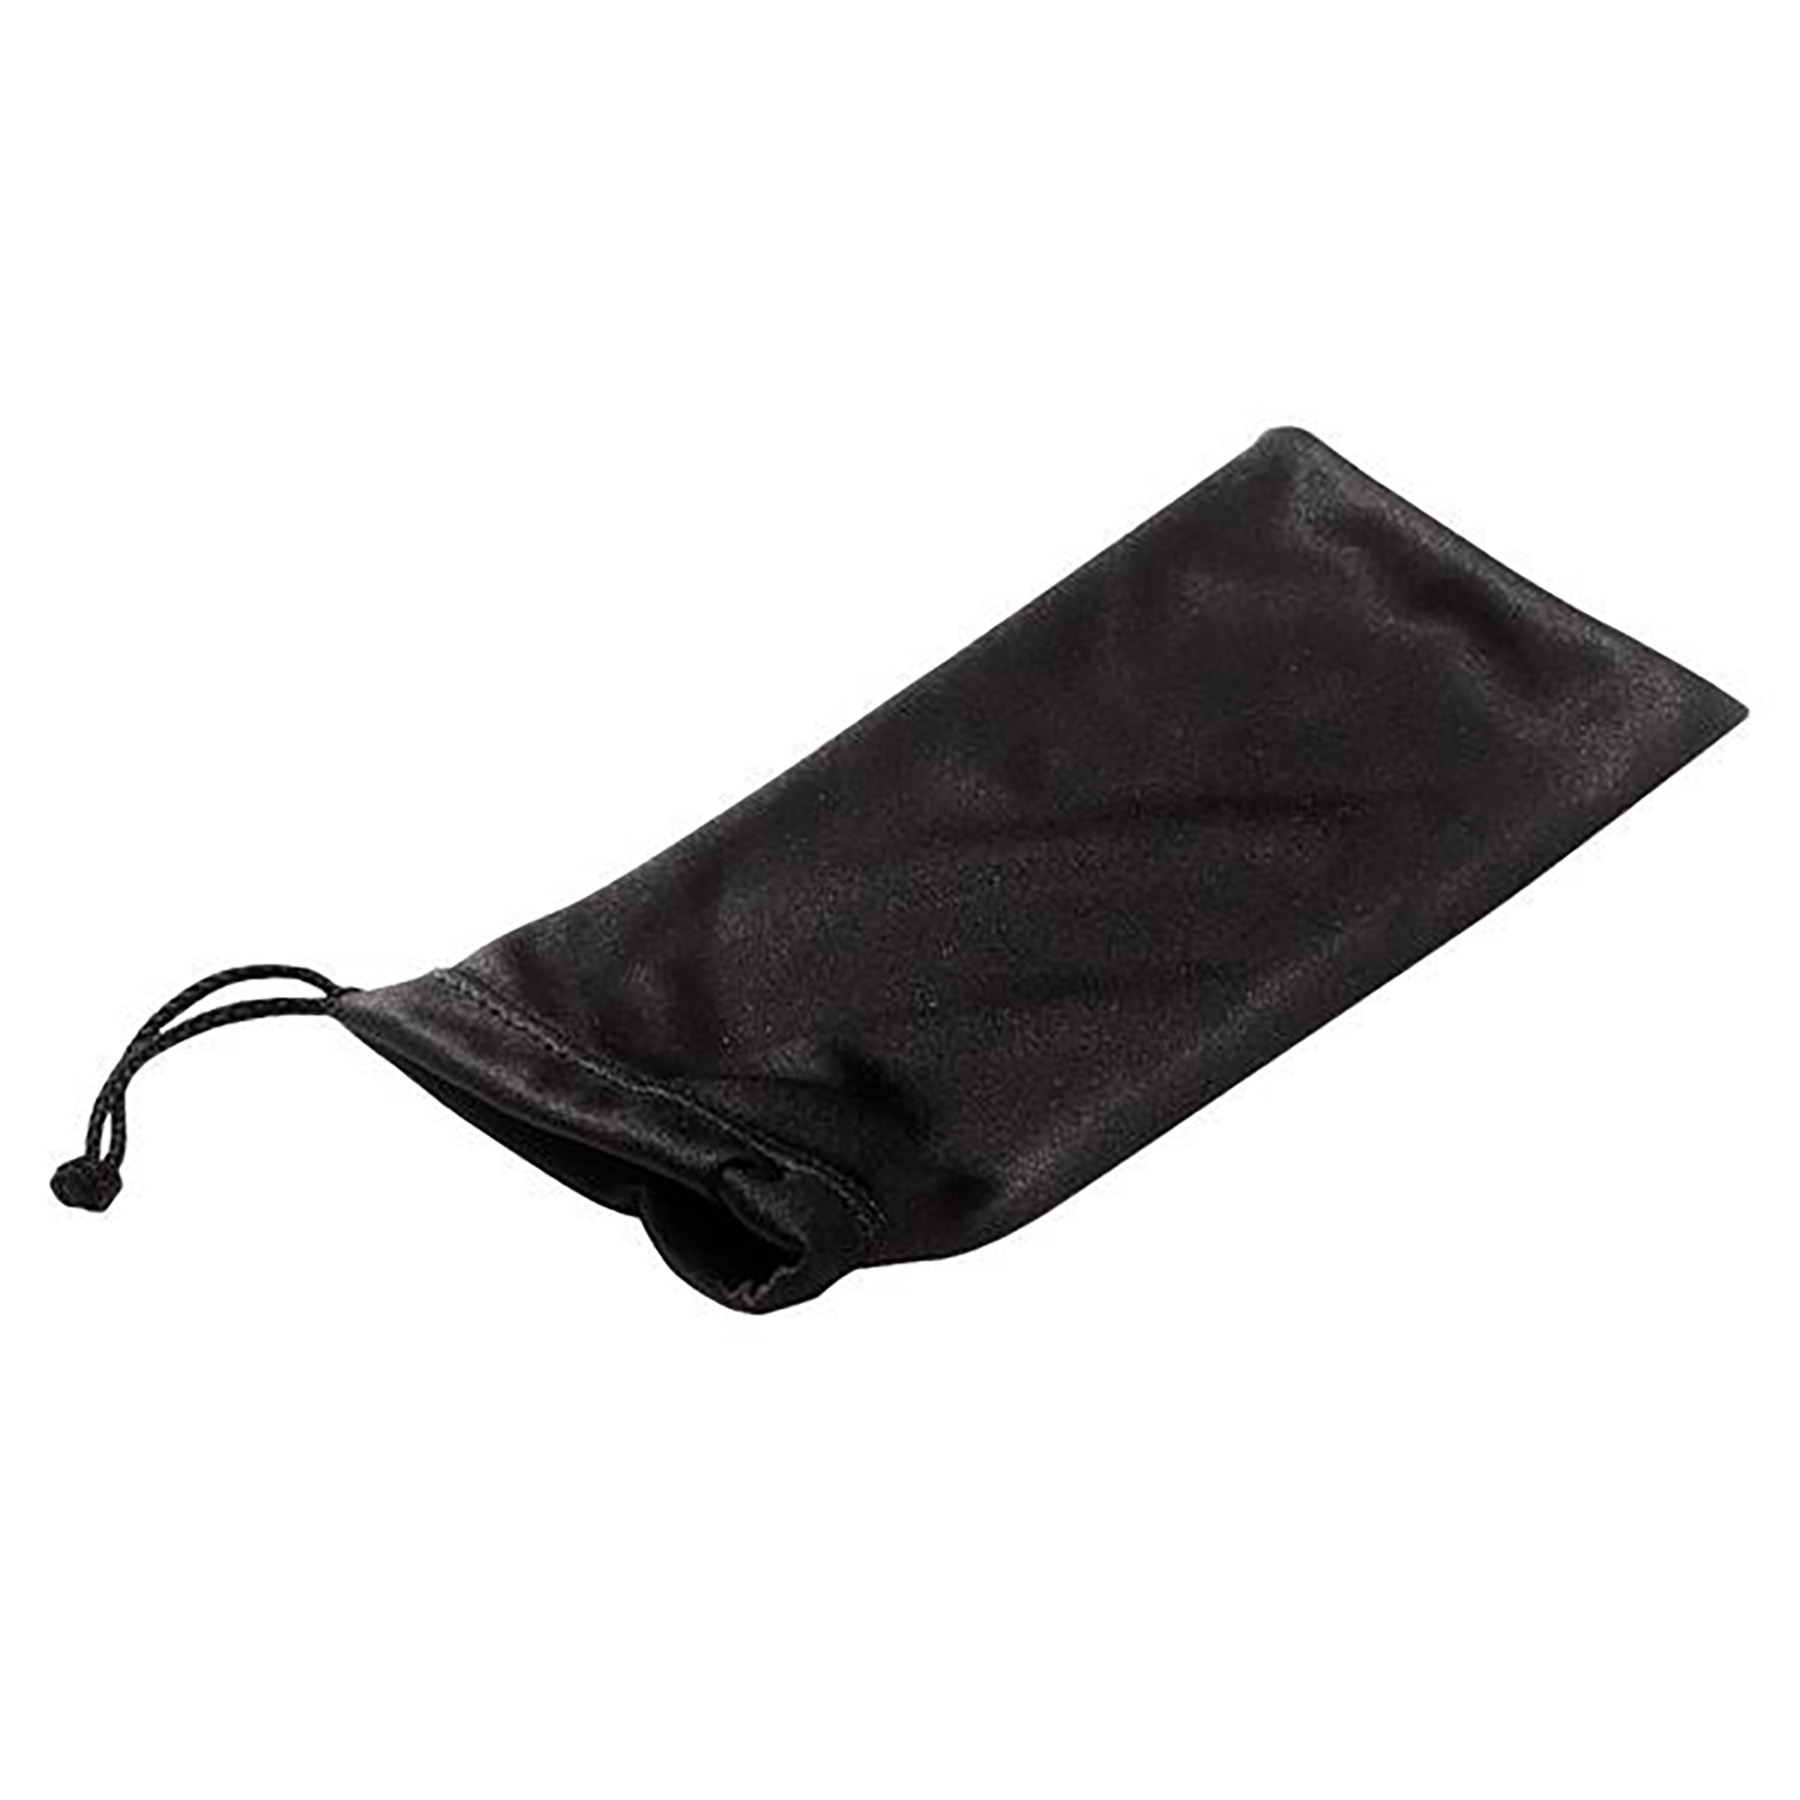 Microfiber Sunglasses Pouch With Drawstring Closure